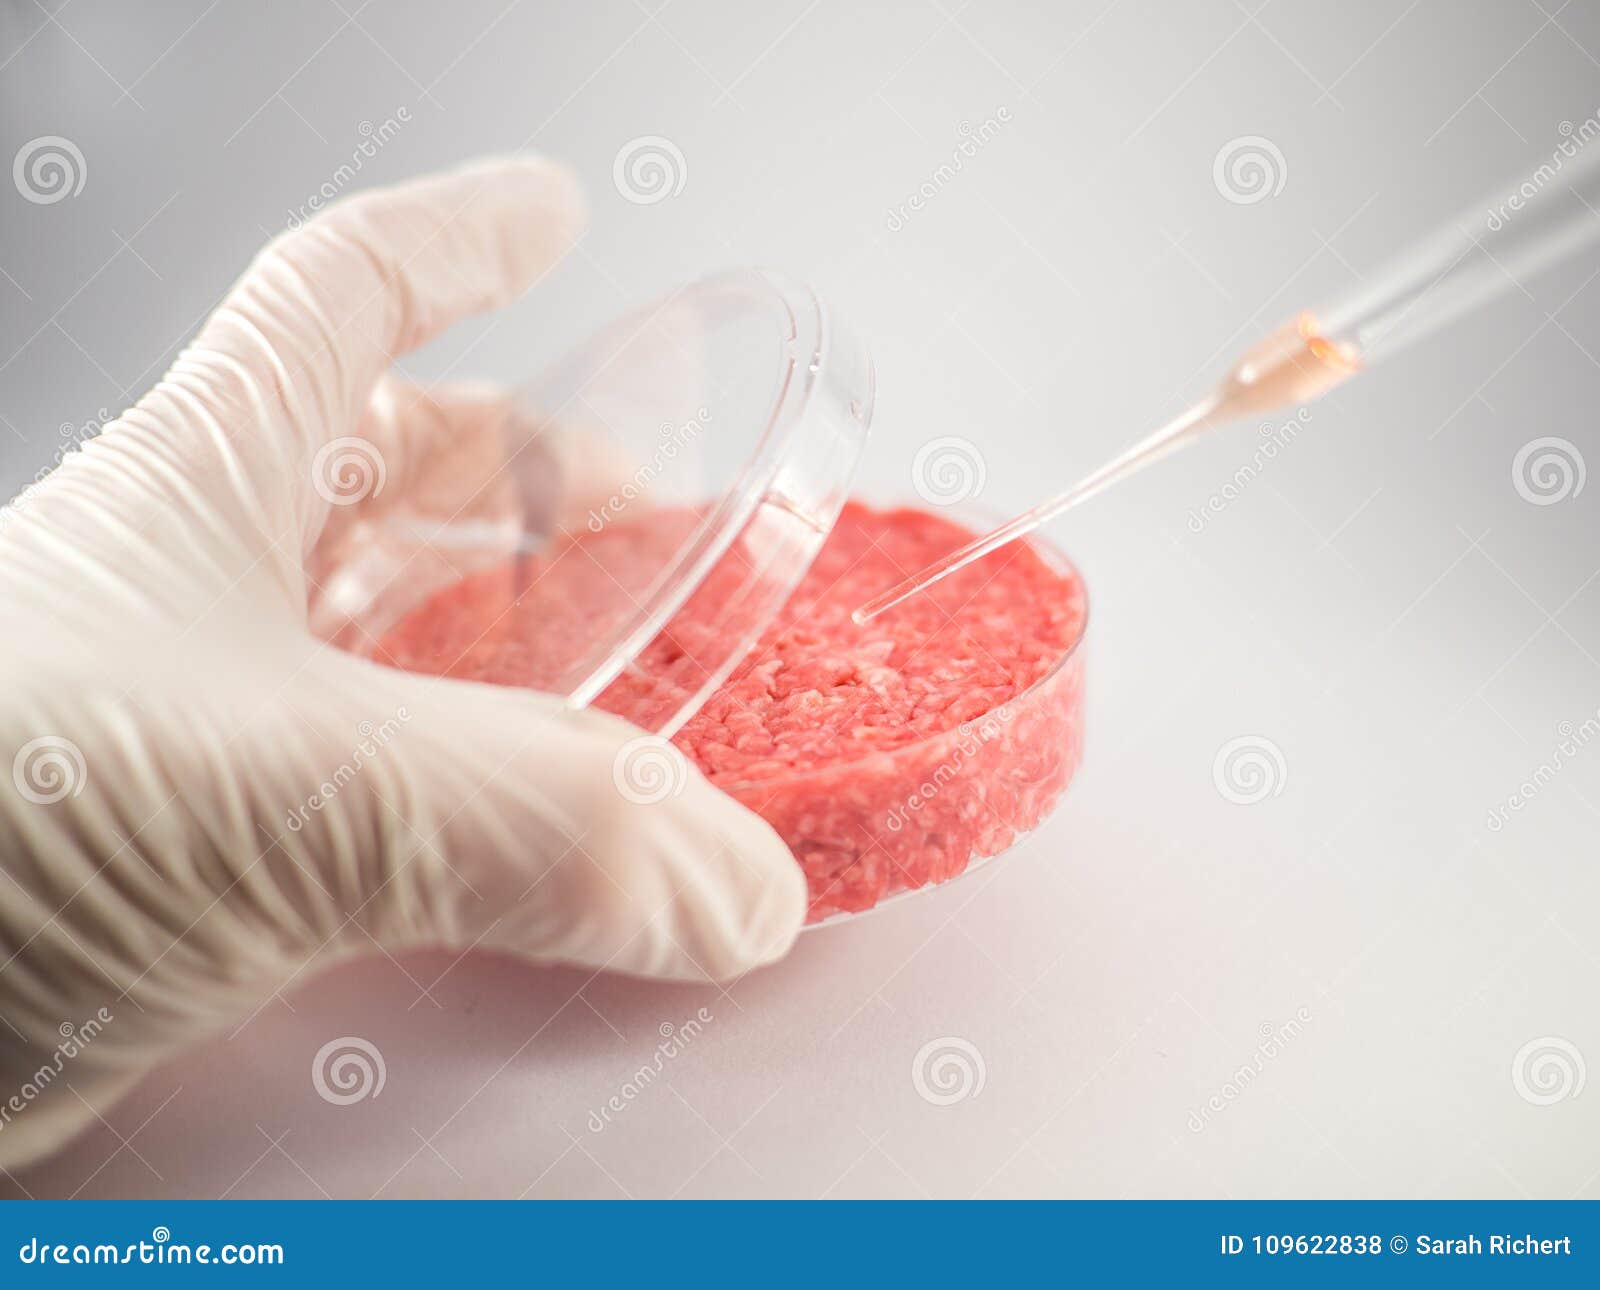 artificial meat research